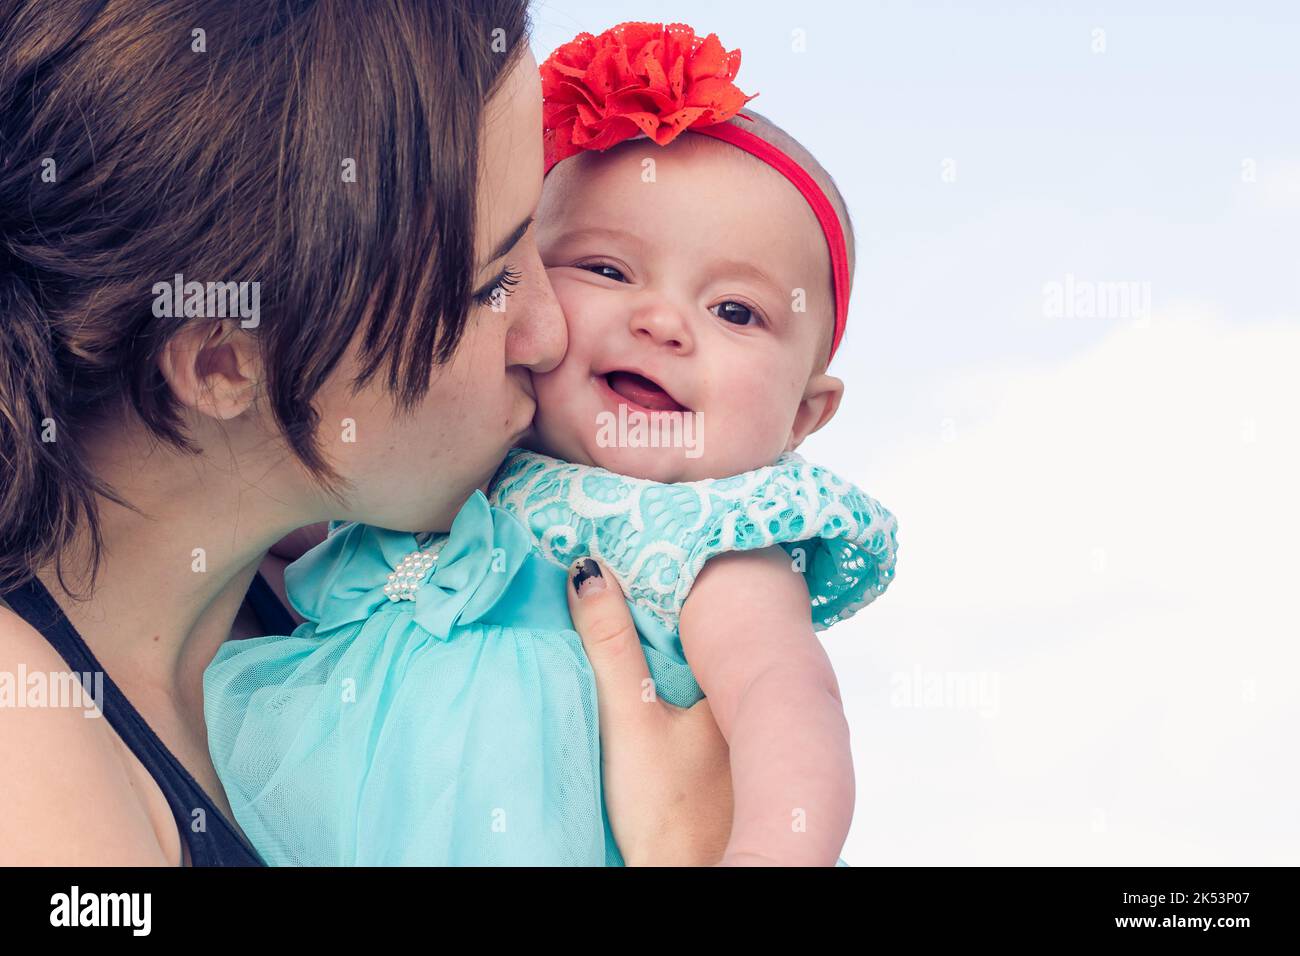 A young mother in her early twenties kisses her baby girl on the cheek. Stock Photo